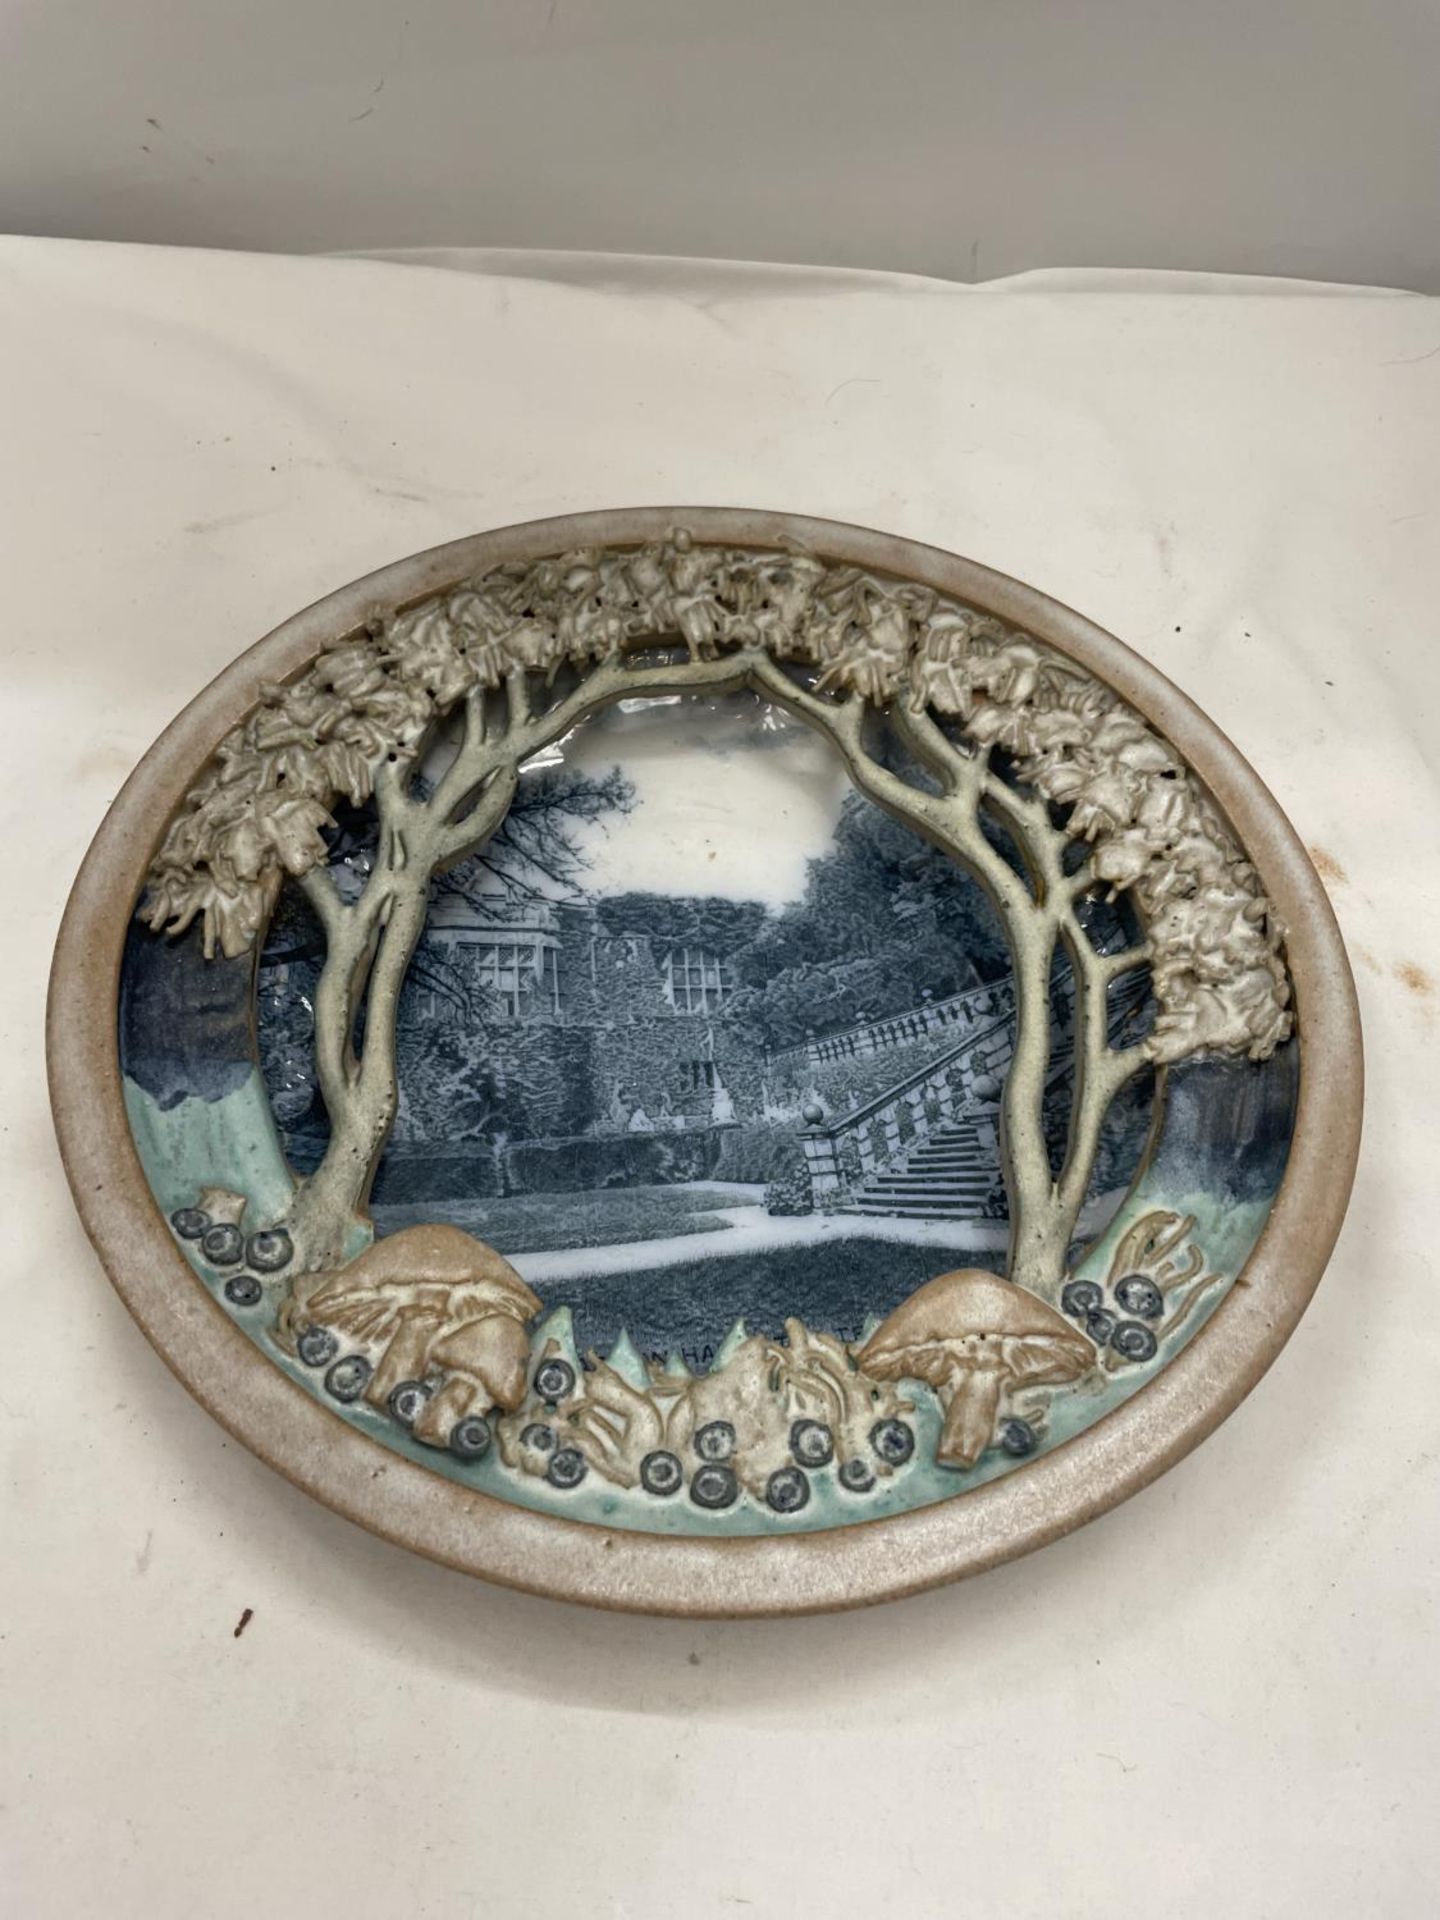 A HADDON HALL WALL PLAQUE WITH A 3D EFFECT SCENE DIAMETER 28CM - Image 3 of 9